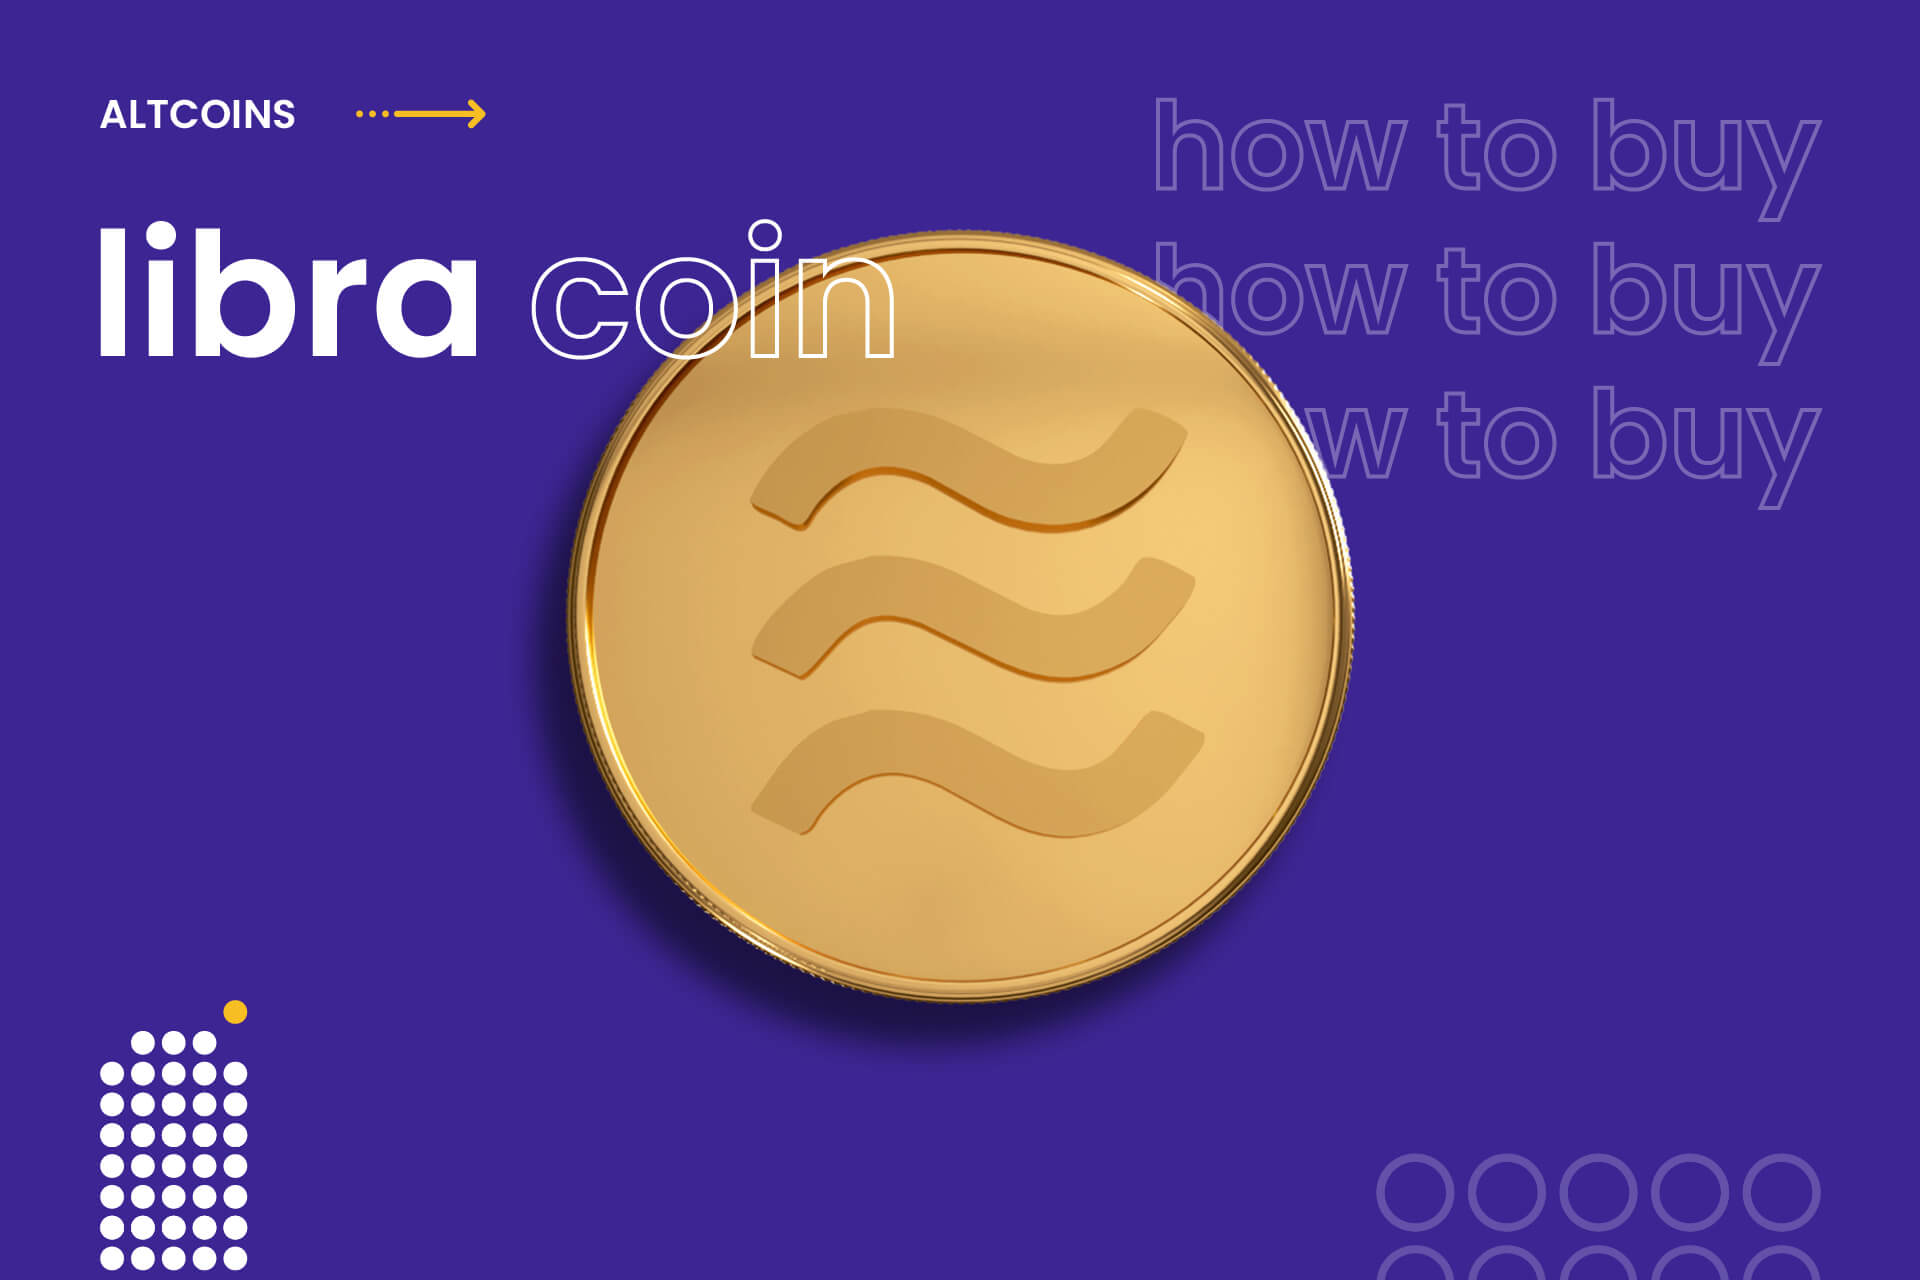 Facebook’s libra cryptocurrency: what you need to know - Vox